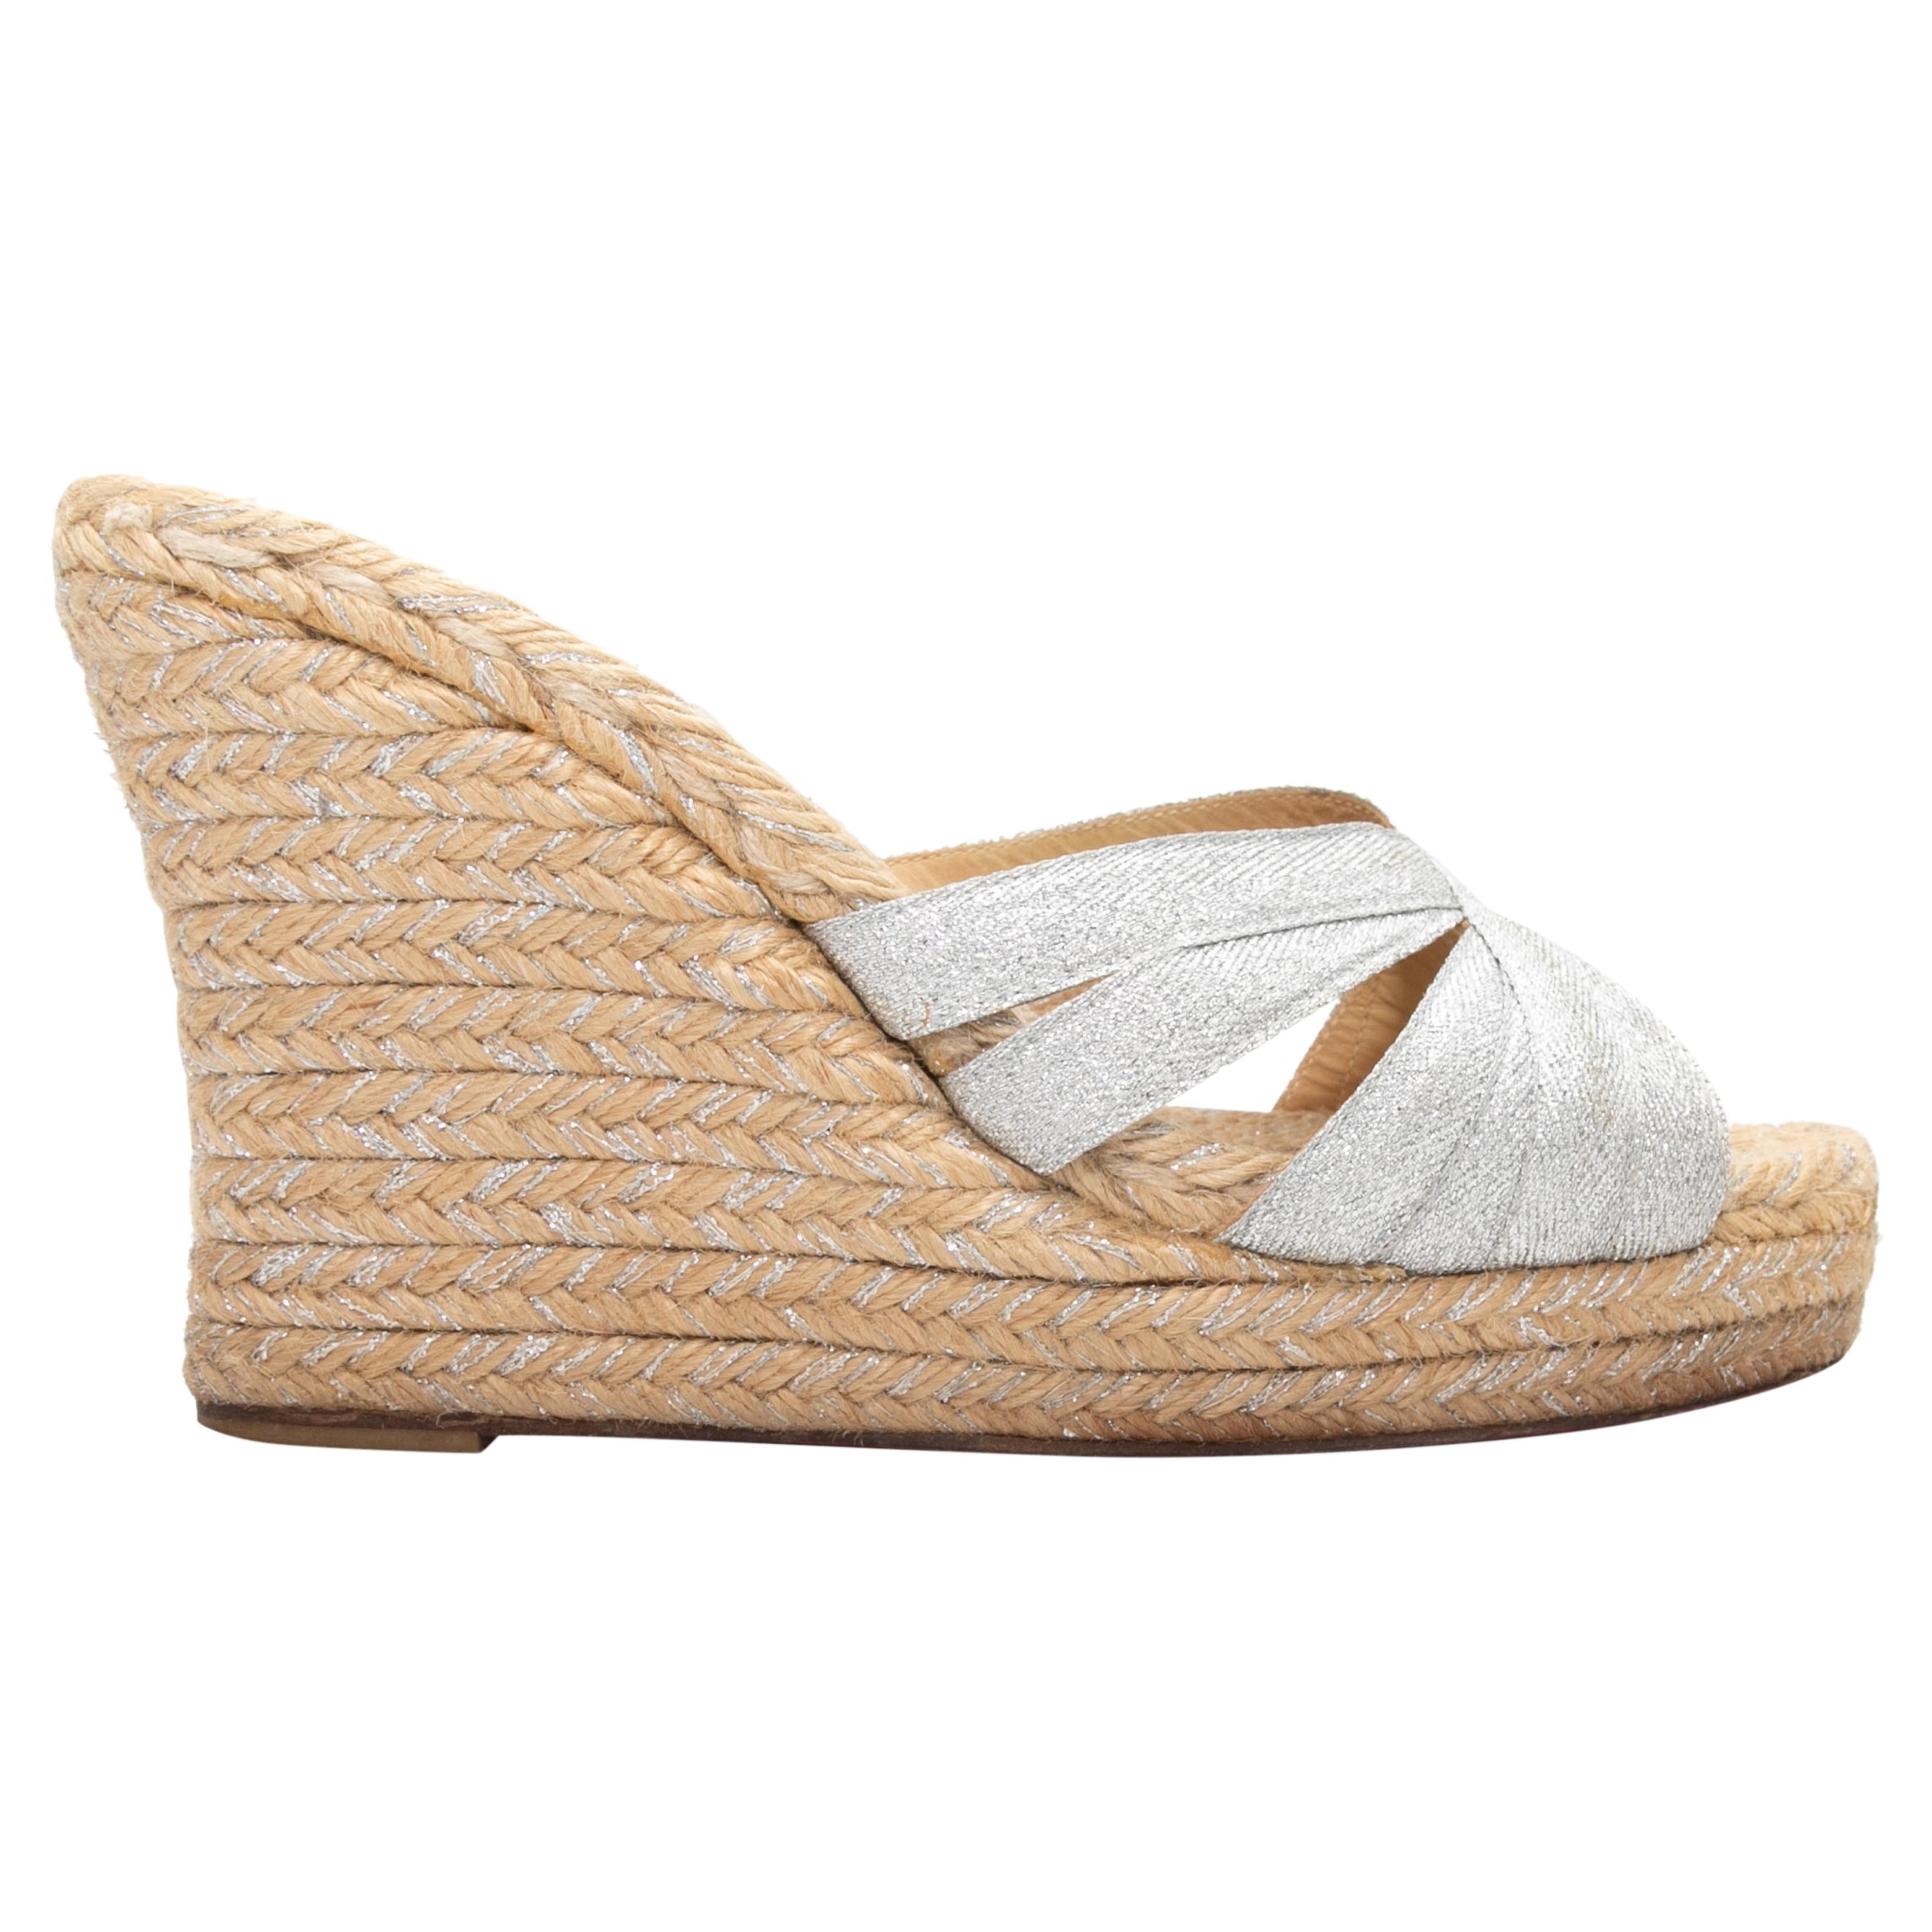 Silver & Beige Christian Louboutin Espadrille Wedges Size 40